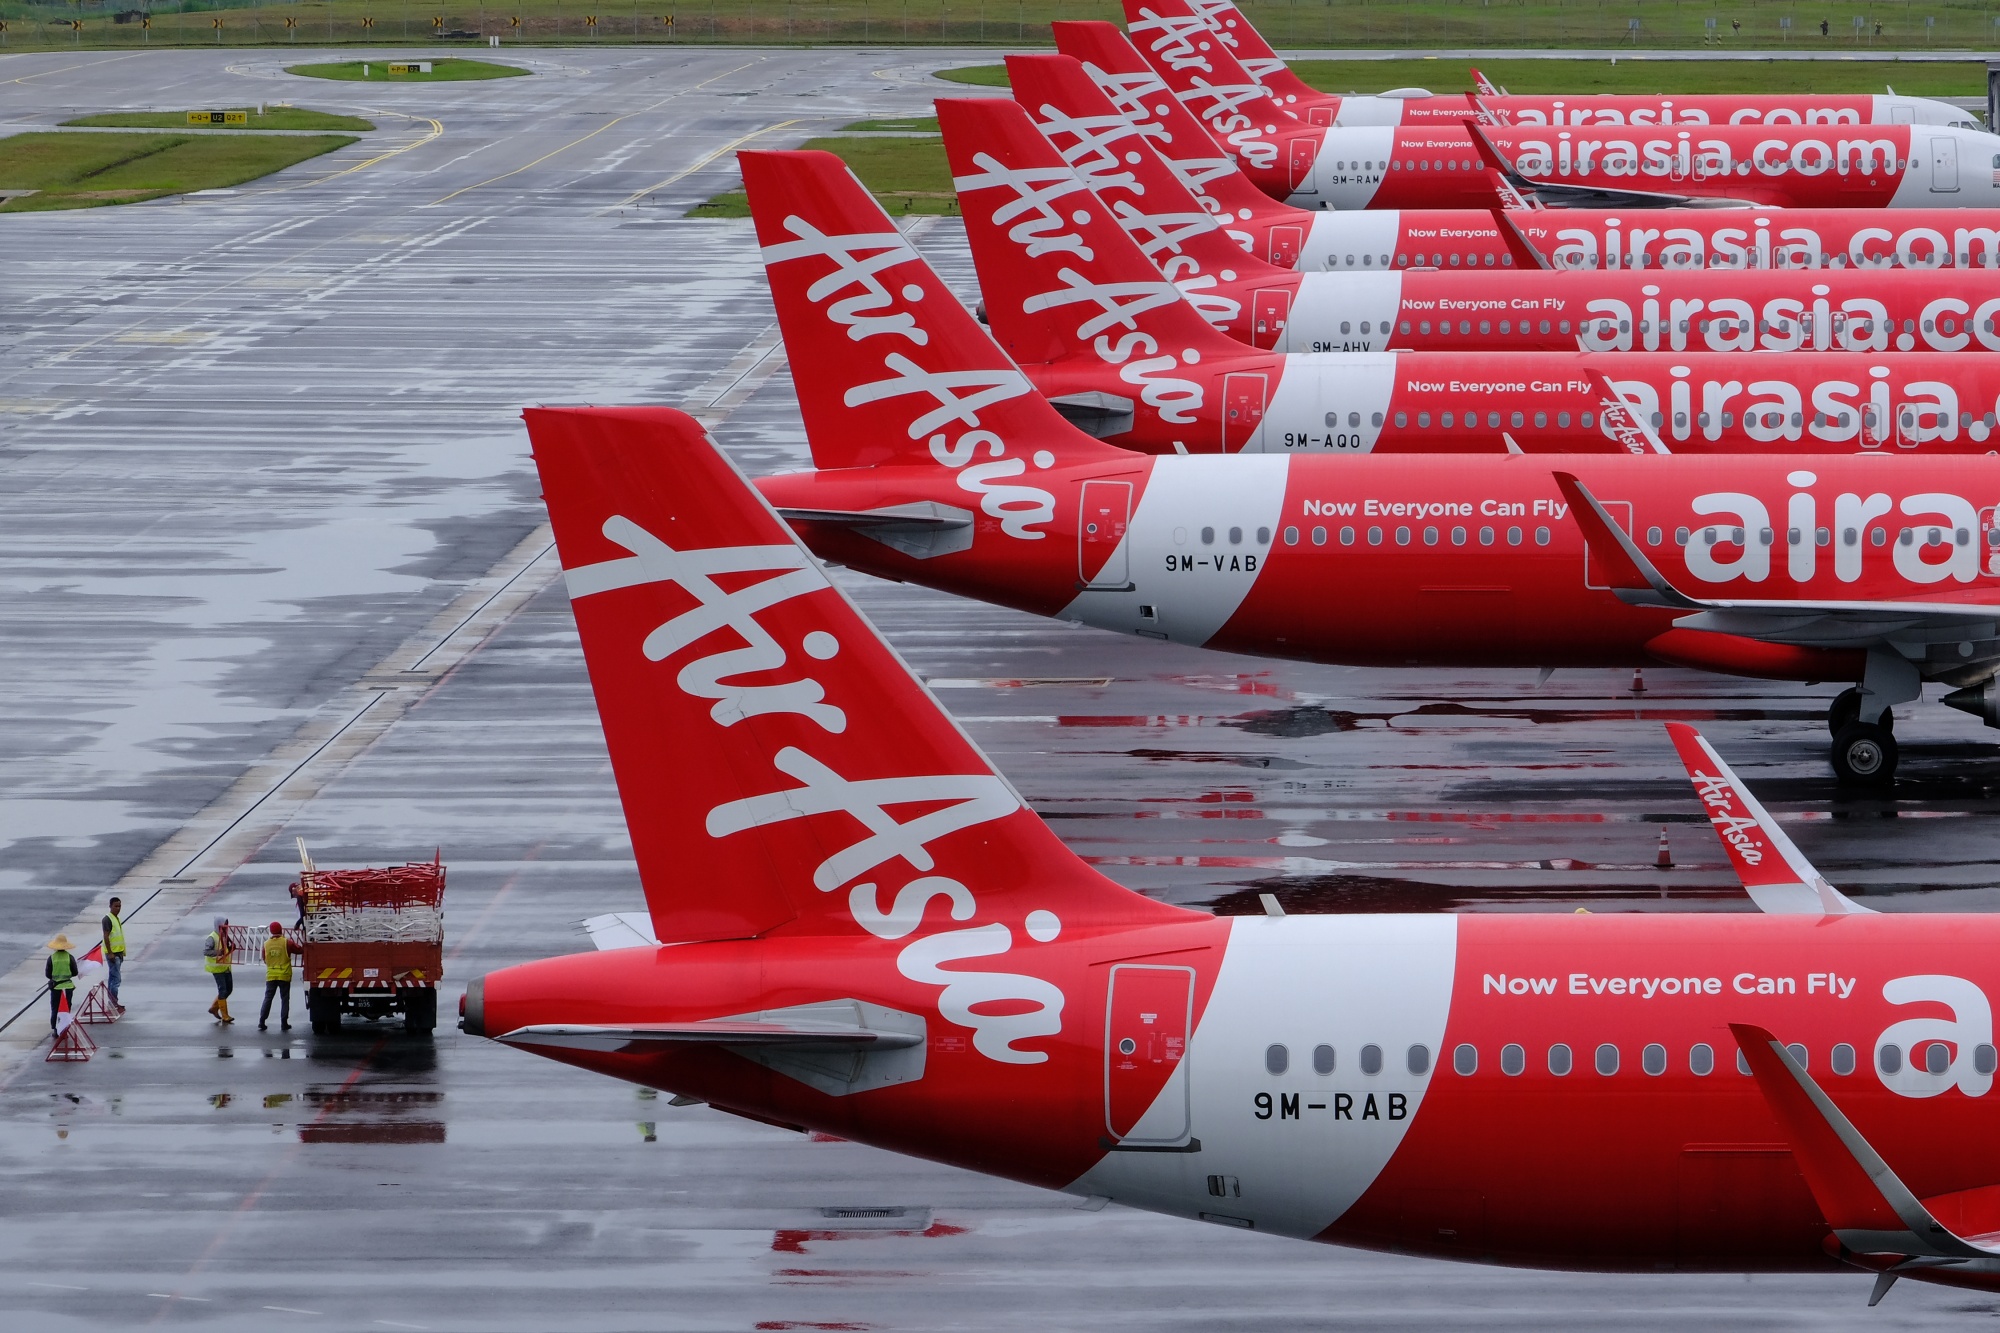 Air asia x share price